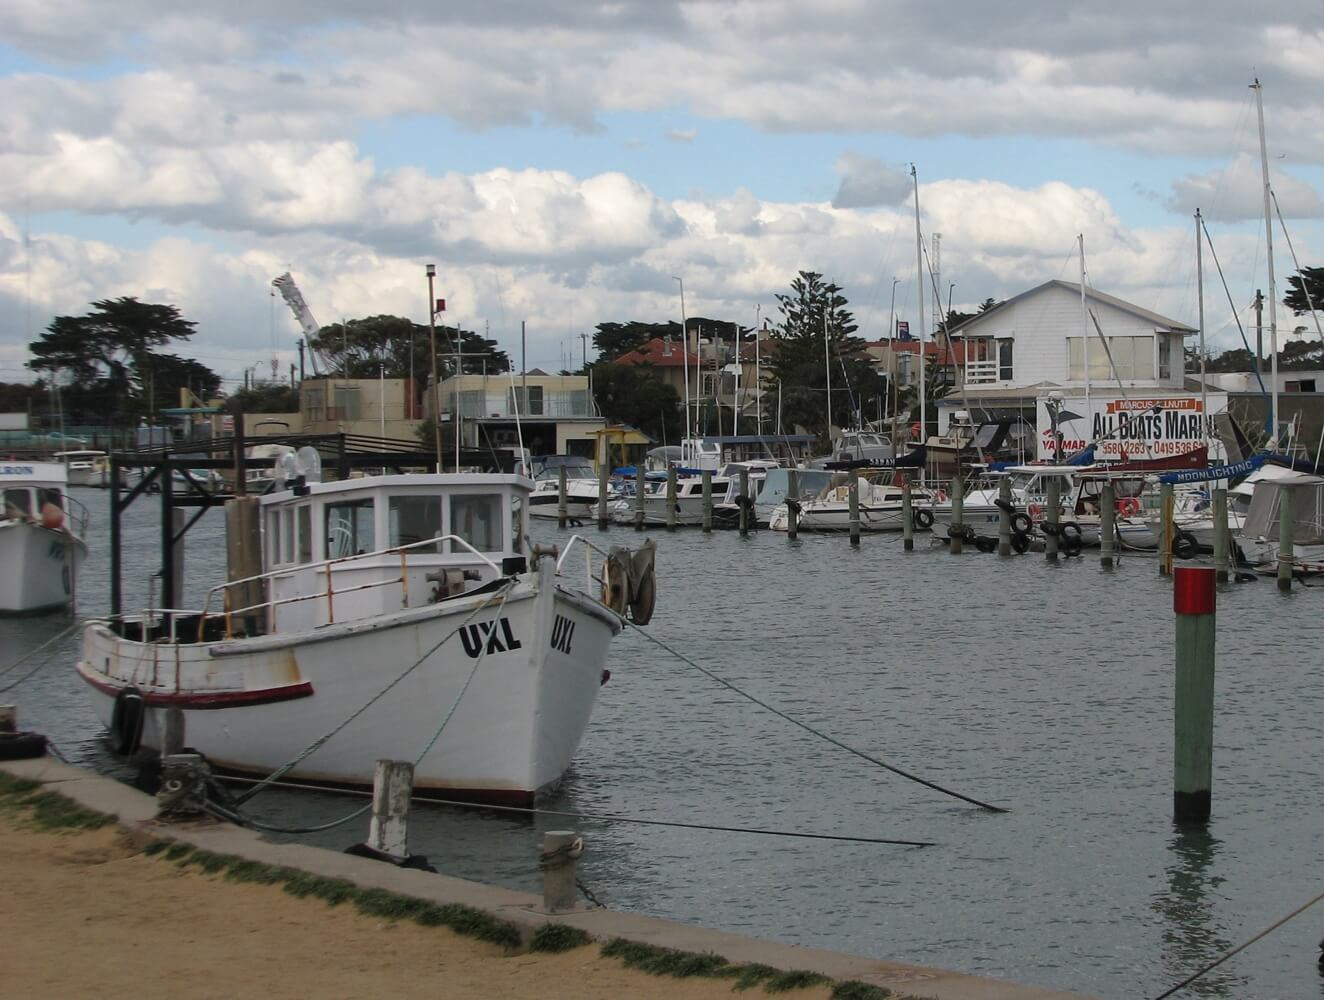 About Mordialloc